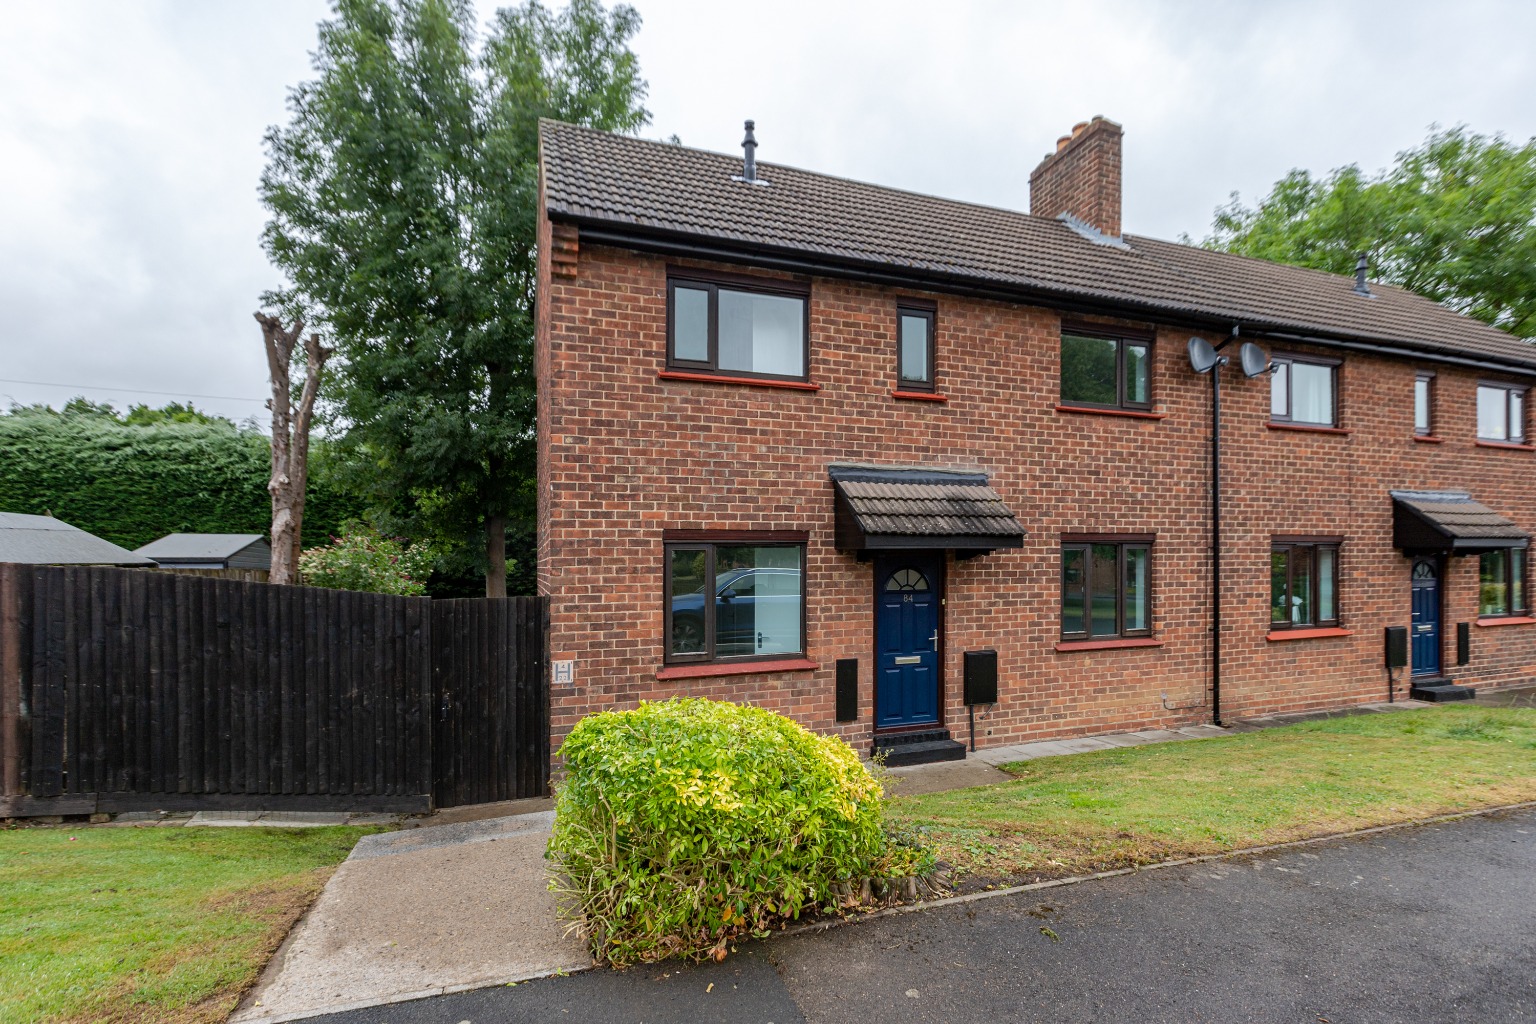 2 bed semi-detached house to rent in Hambleton Road, Catterick Garrison - Property Image 1